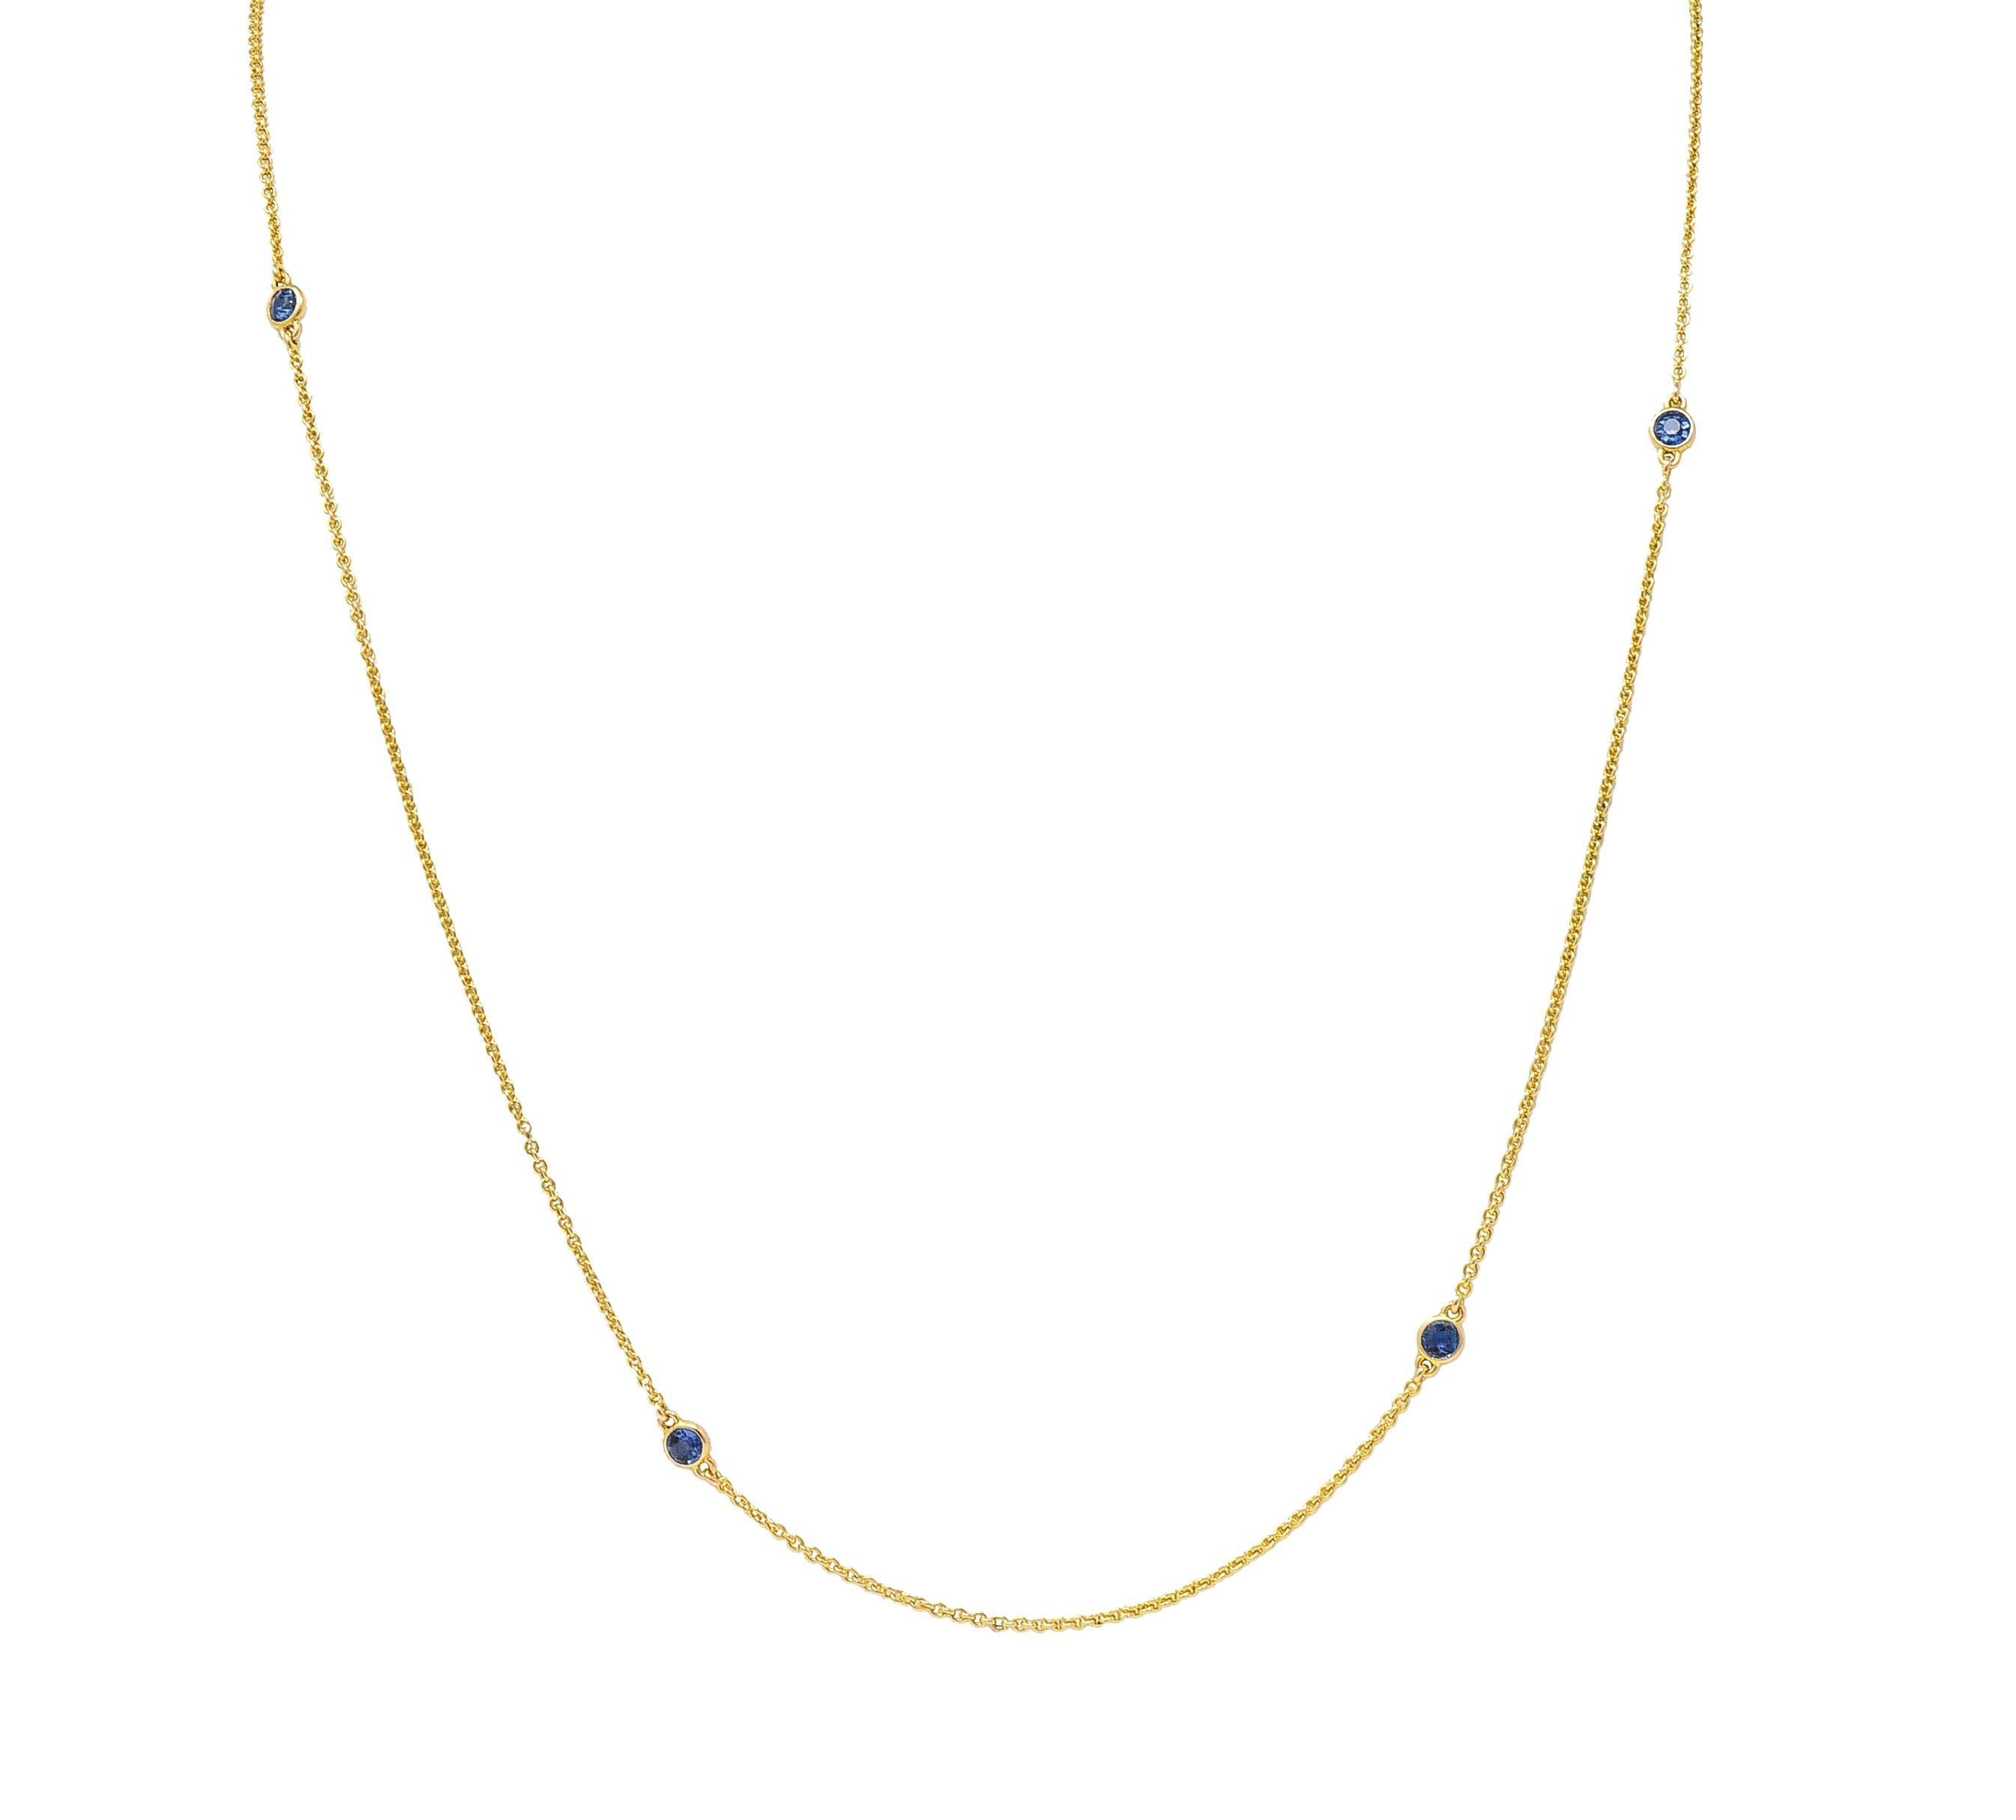 Victorian 2.10 CTW Sapphire 14 Karat Yellow Gold Antique Station Chain Necklace For Sale 5